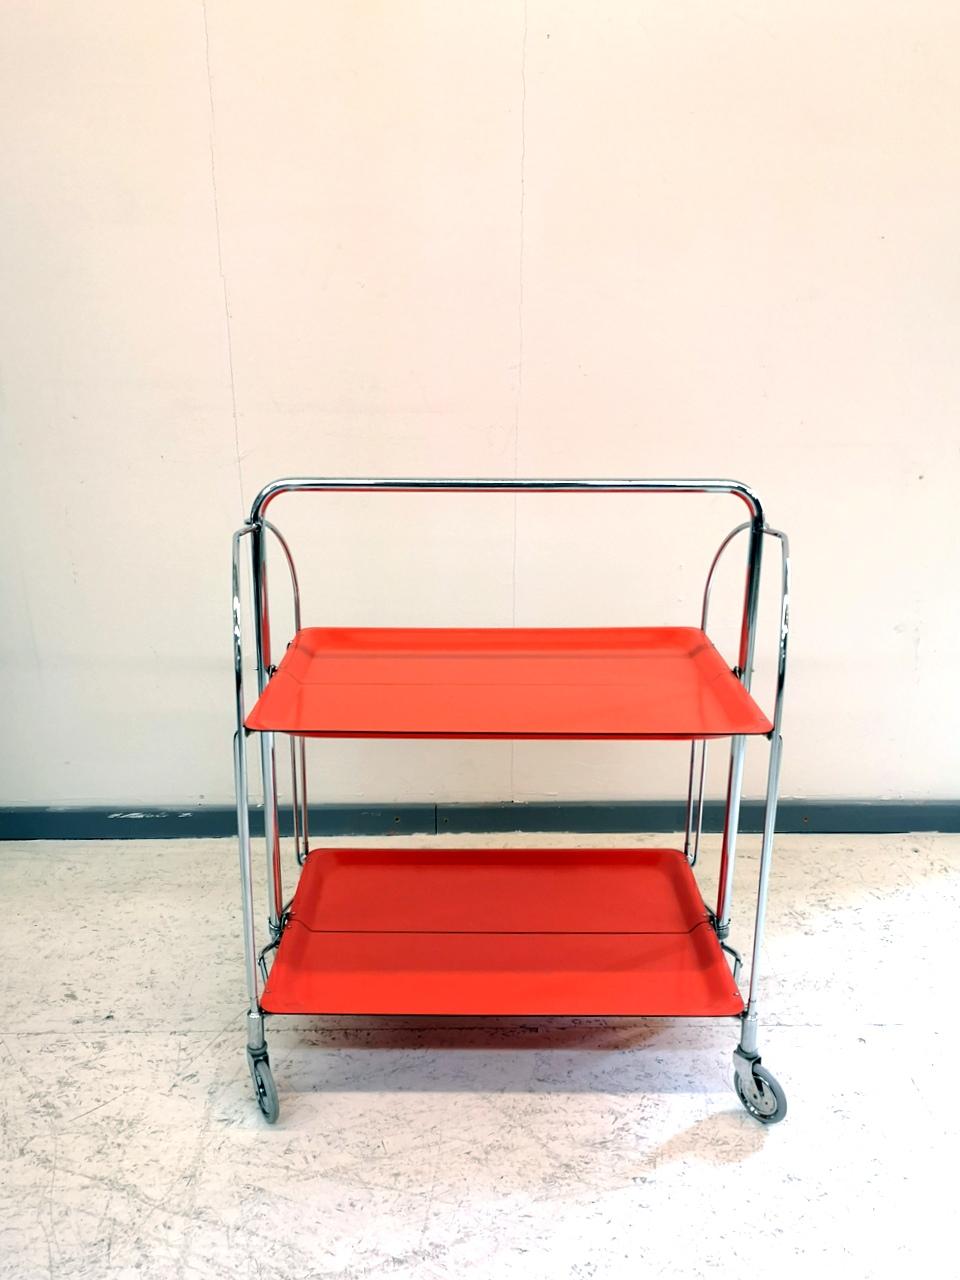 From West-Germany, this 1960s bar cart is foldable in the middle for easy storage. It features a coral/orange color laminated plastic body and chrome-plated legs.